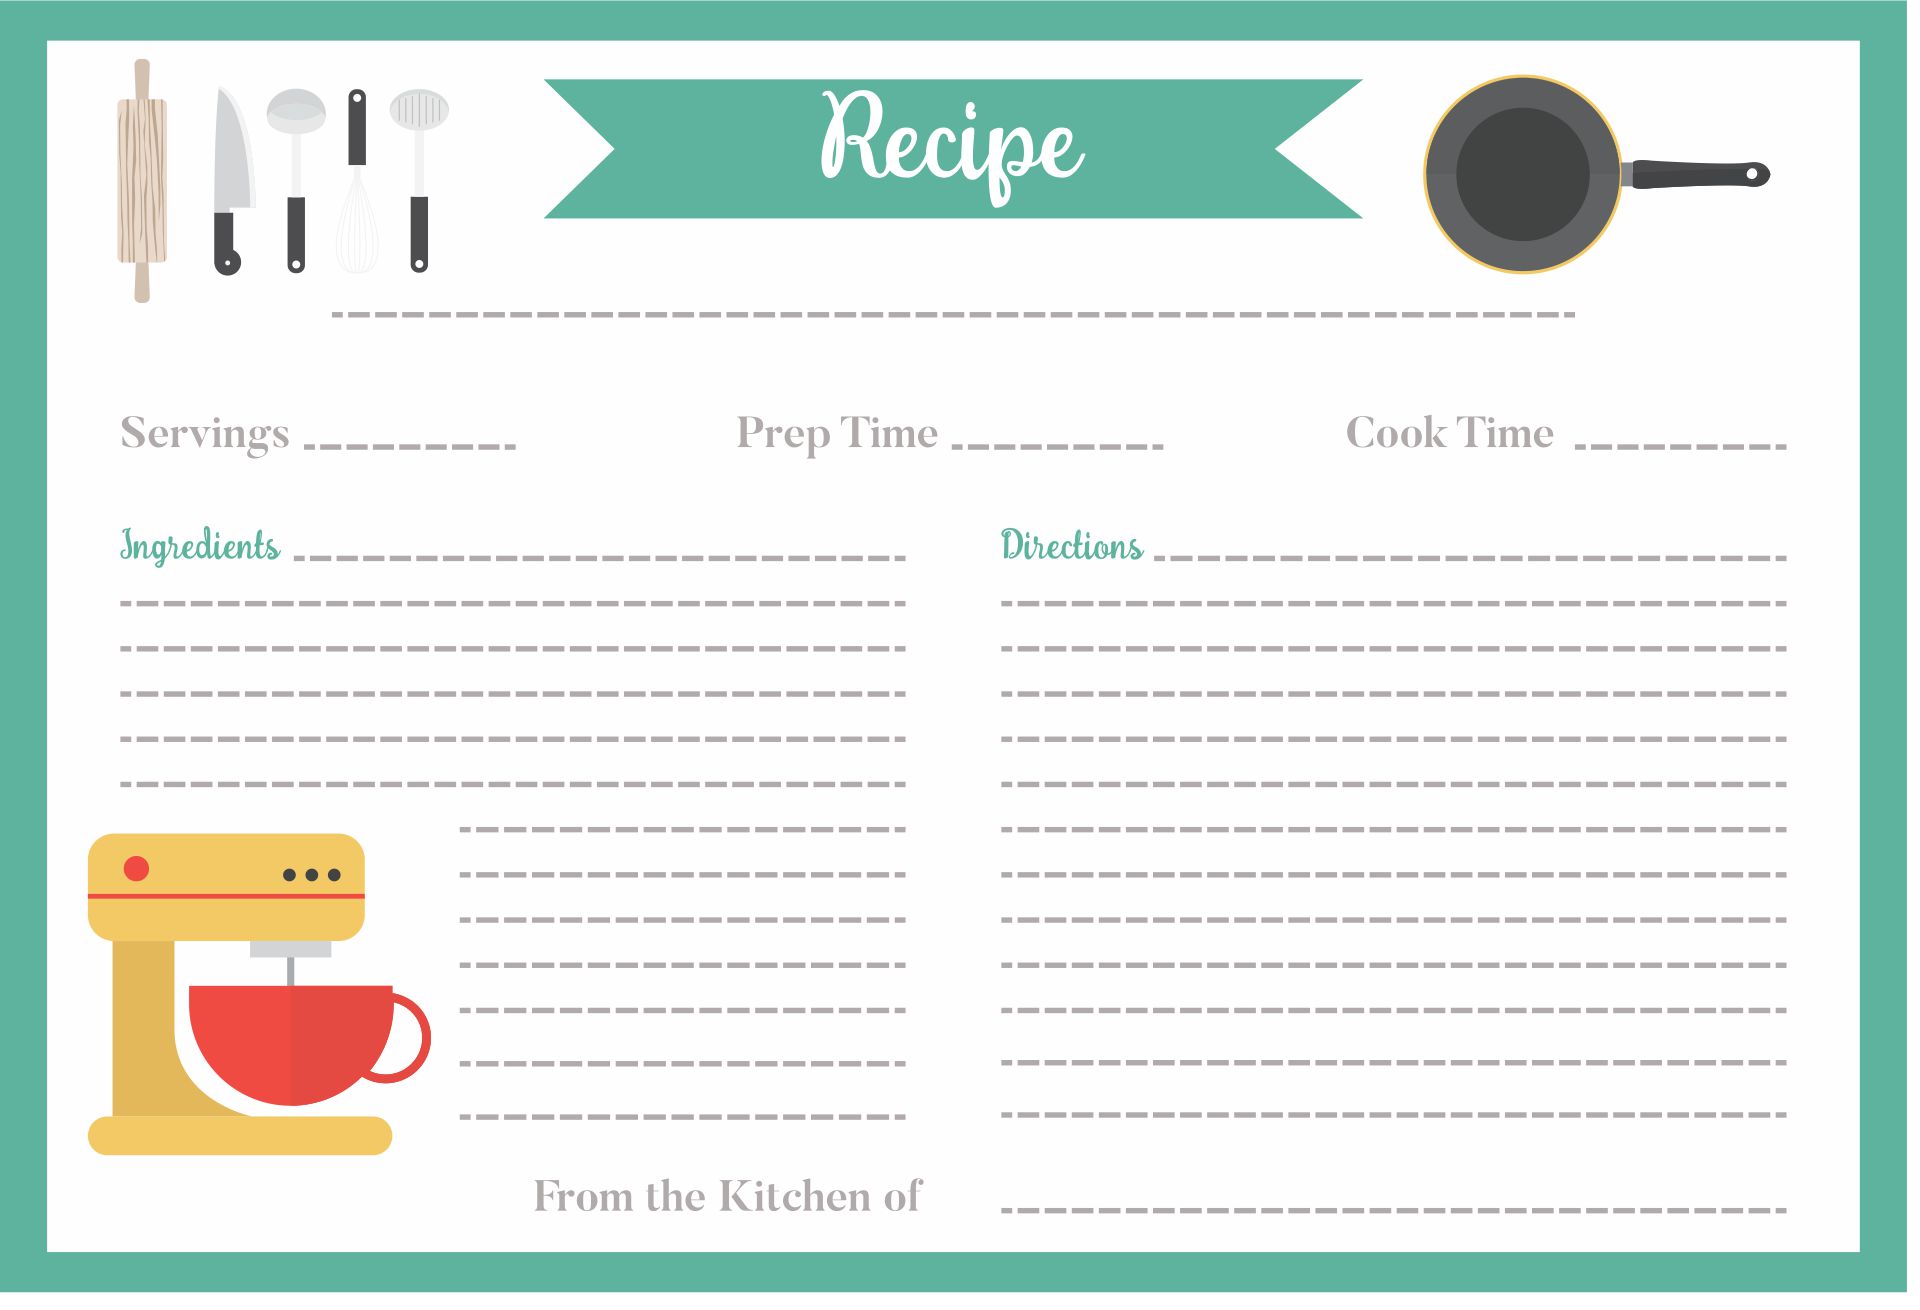 word template 4x6 recipe cards